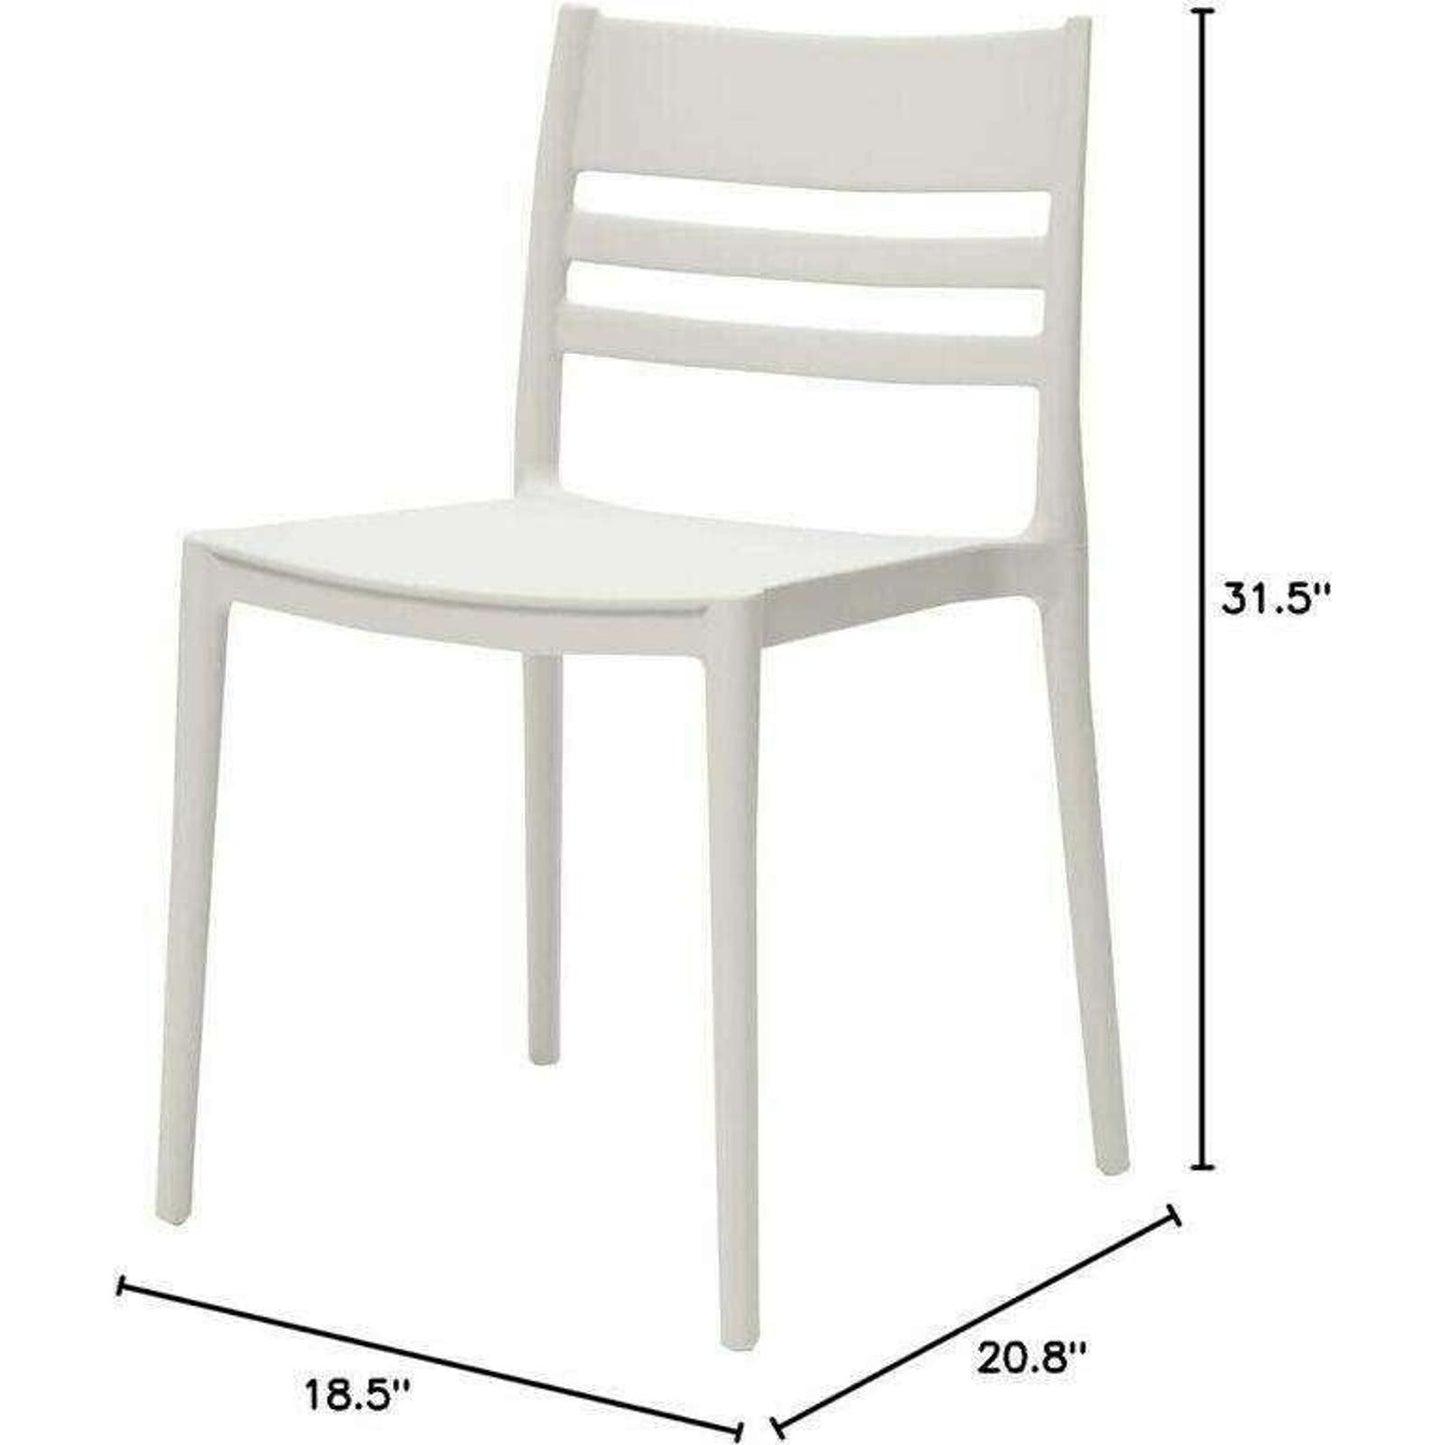 Amazon Basics Armless Slot-Back Dining Chairs, 2-Pack, White, Indoor/Outdoor